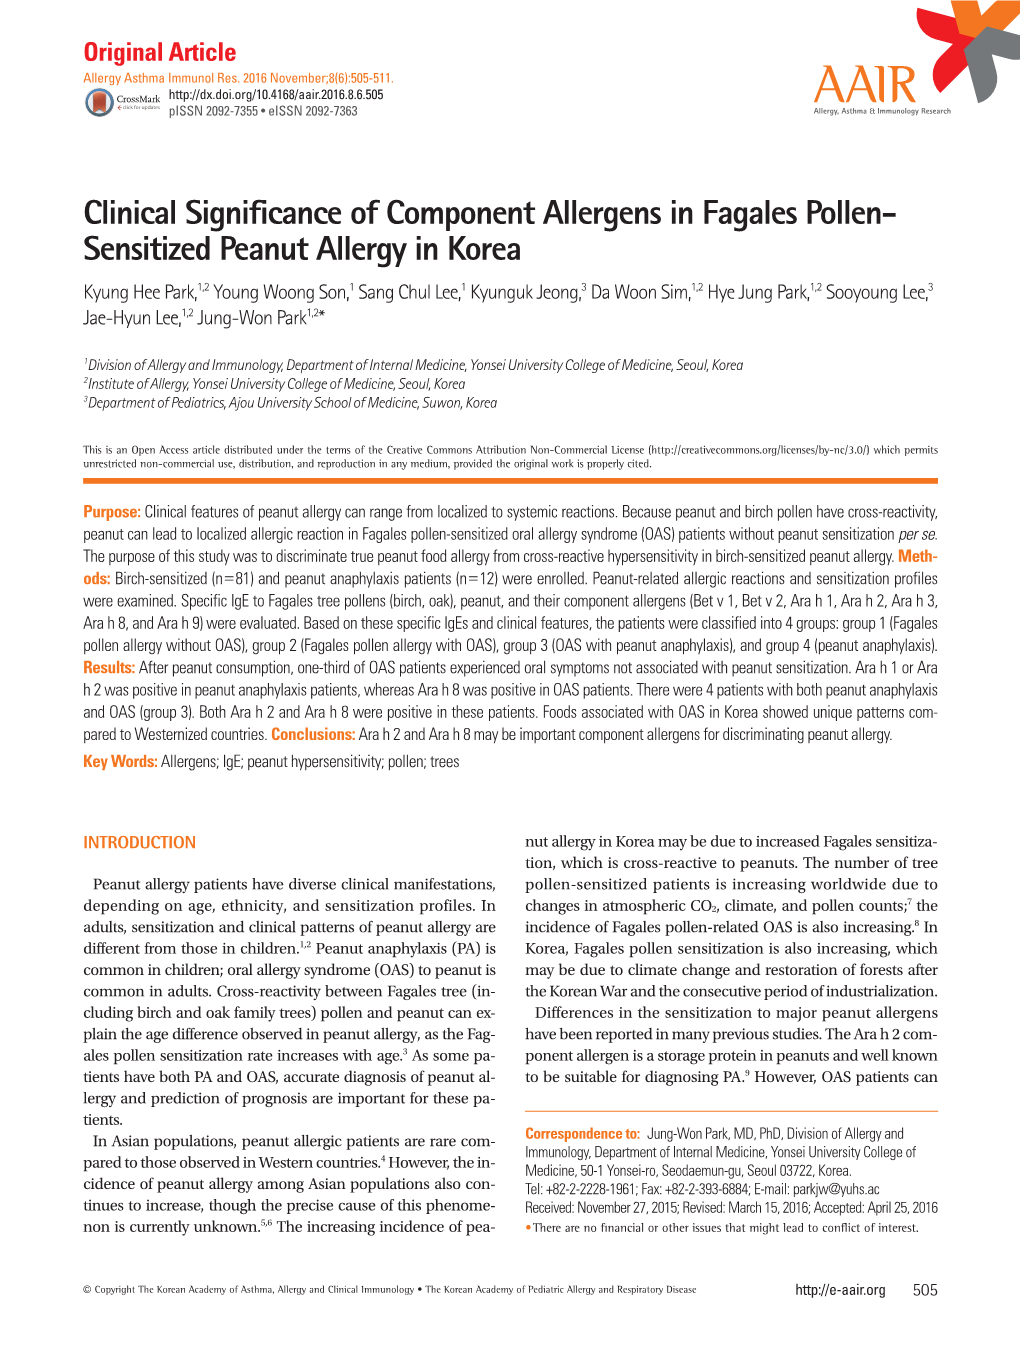 Clinical Significance of Component Allergens in Fagales Pollen